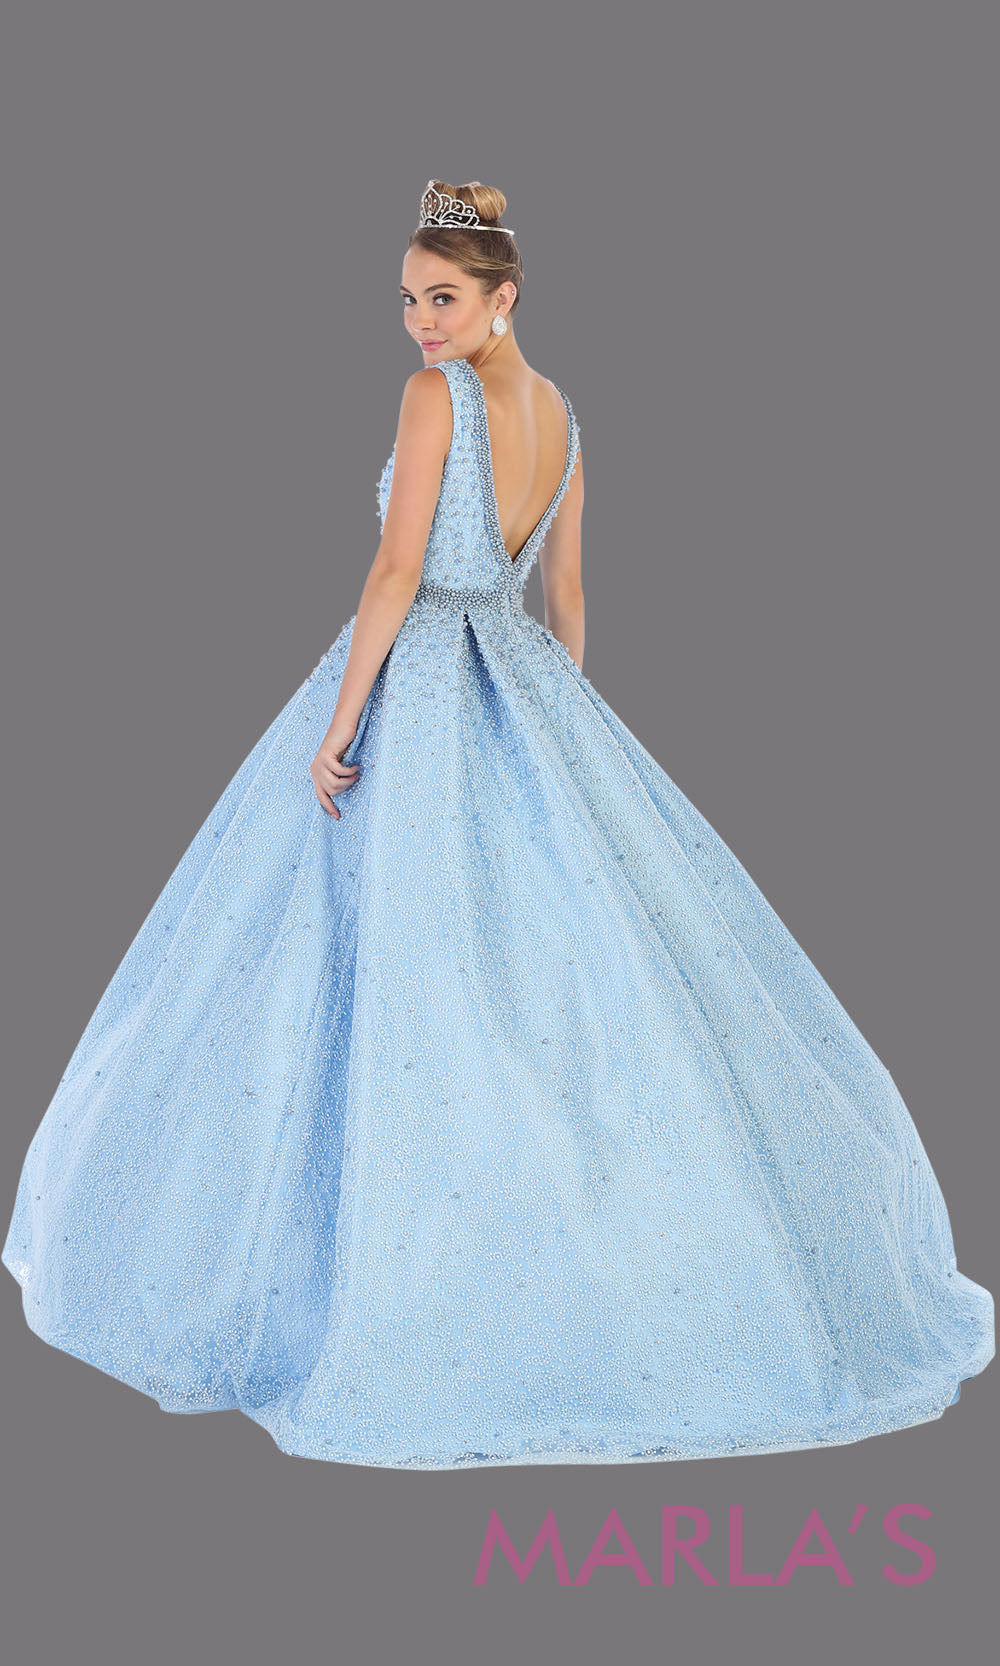 Back of Long aqua blue princess quinceanera v neck ball gown with straps.Perfect for light blue Engagement ballgown dress, Quinceanera, Sweet 16, Sweet 15, Debut and blue Wedding bridal Reception Dress. Available in plus sizes.